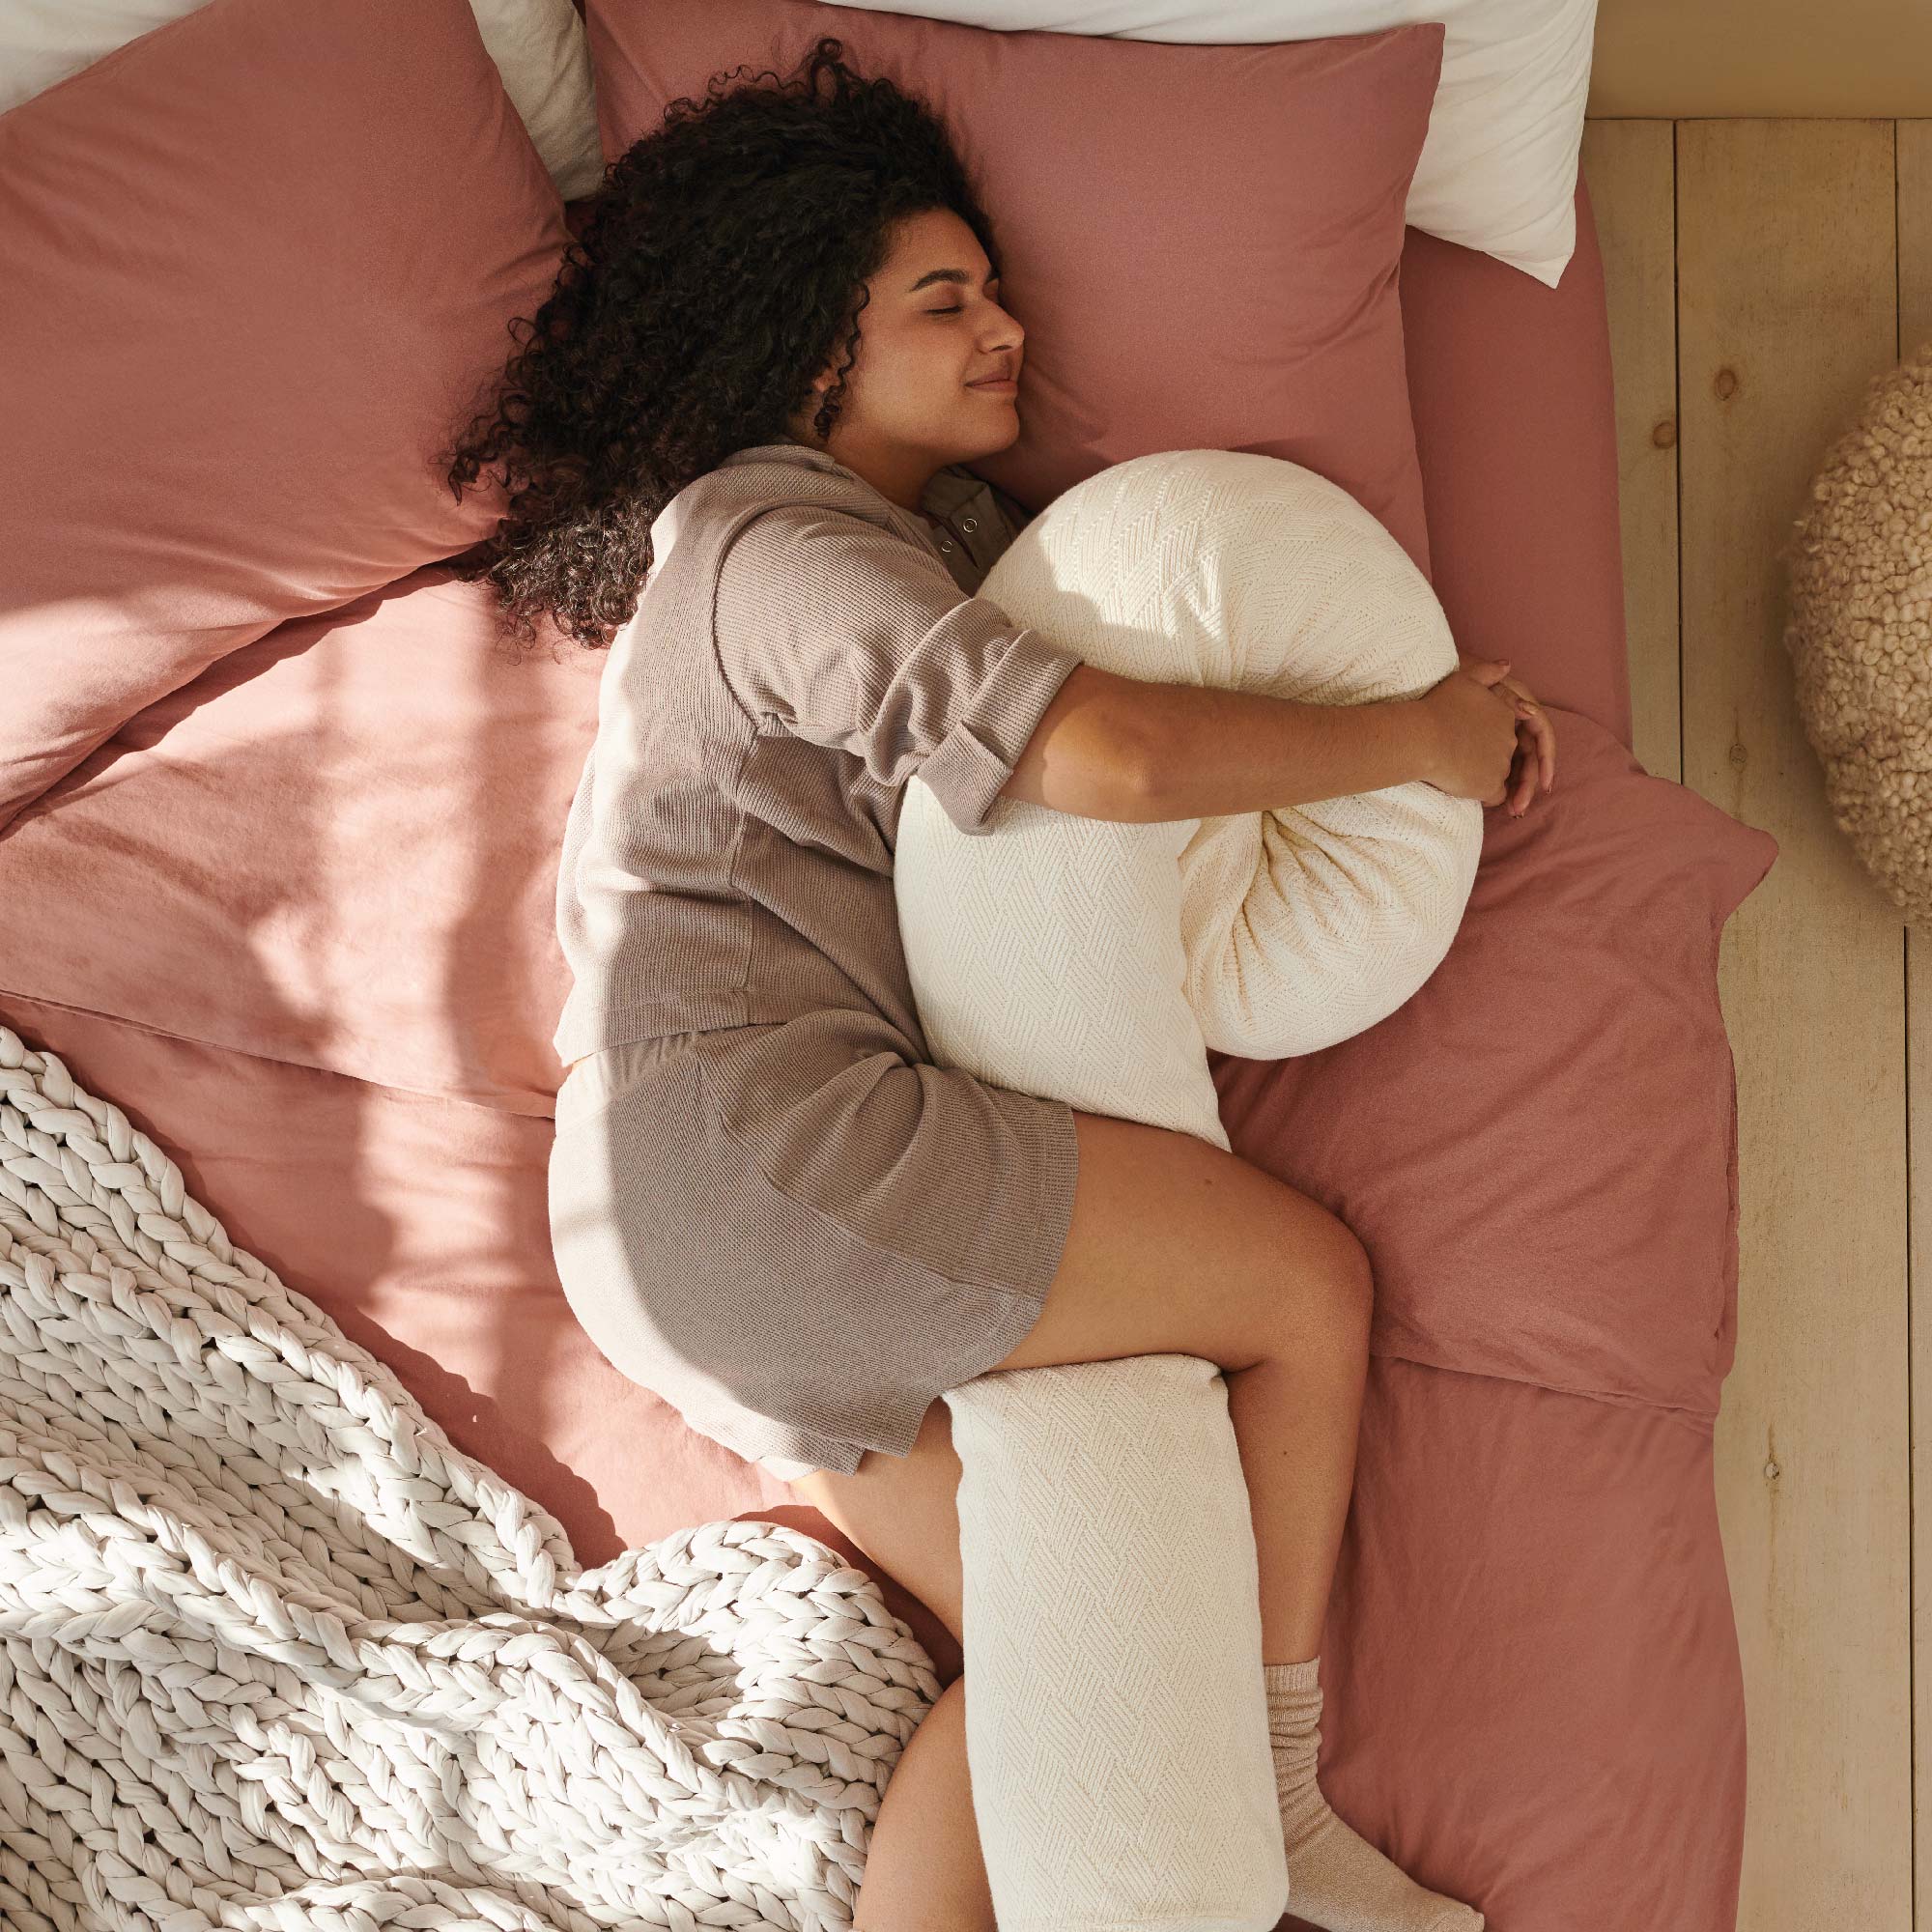 Sleeping with Pillow Between Your Legs: Benefits, How to Do It